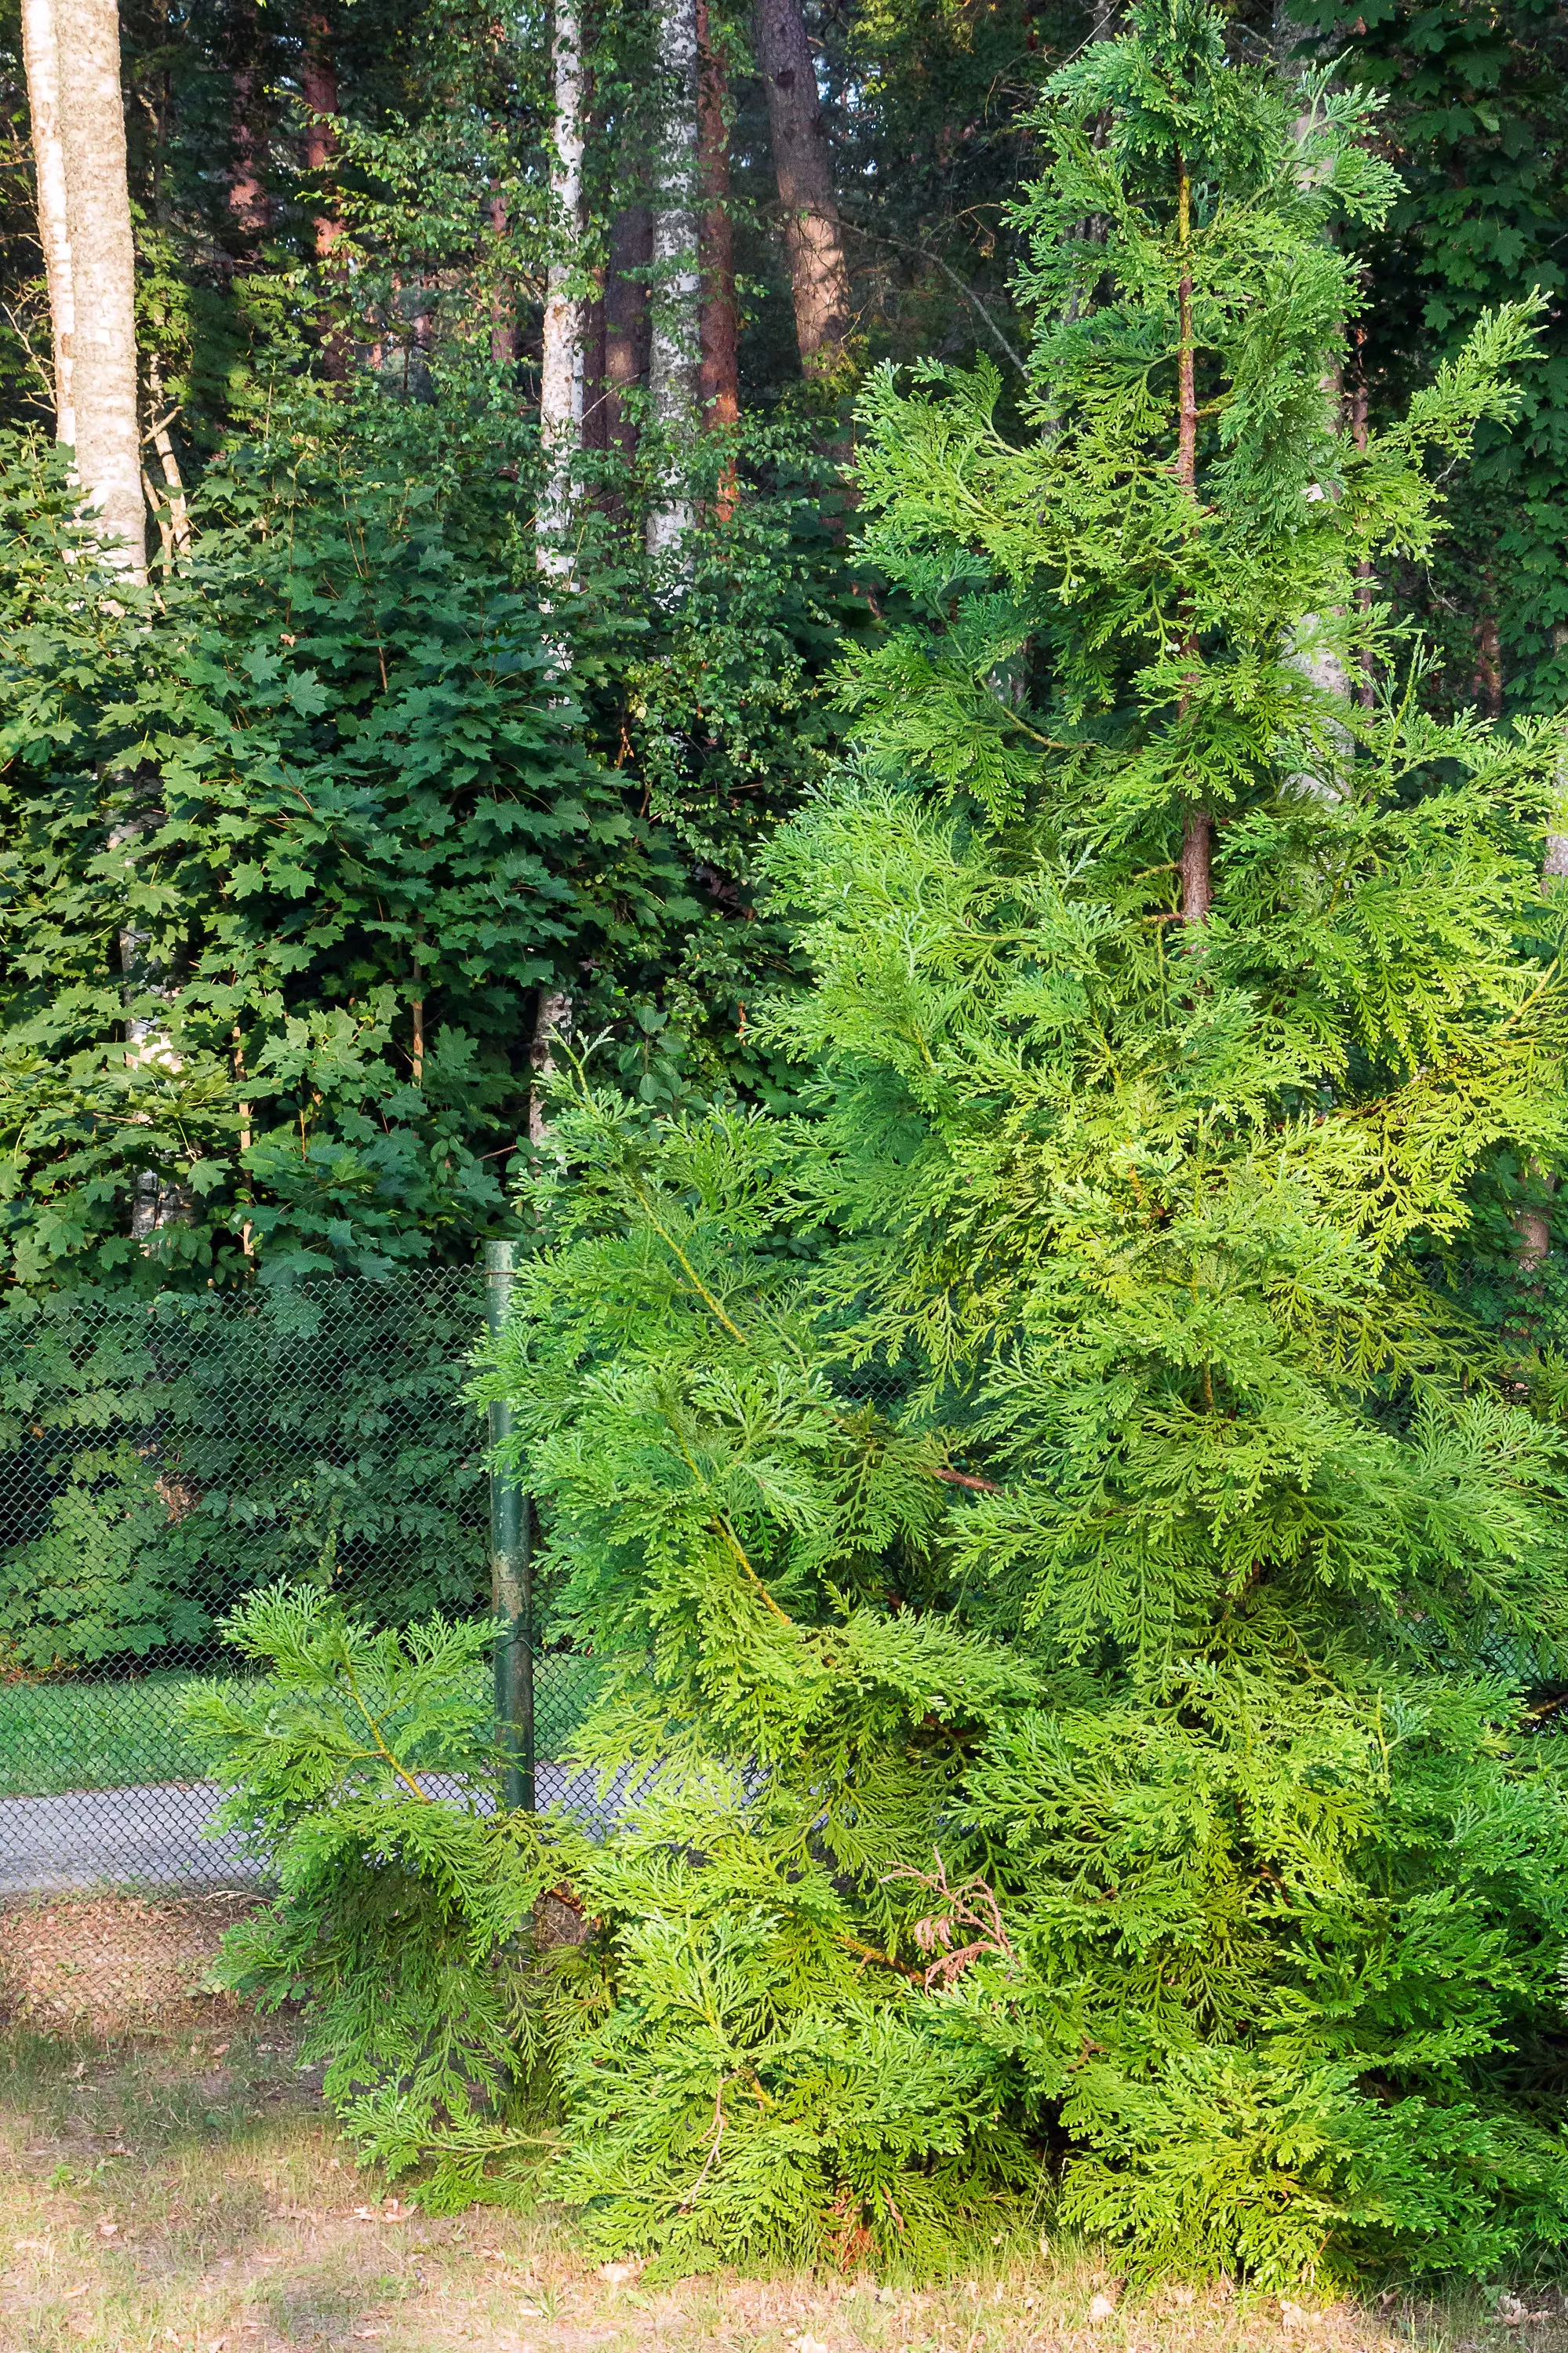 Thuja Green Giant Trees for Sale   Buying & Growing Guide   Trees.com